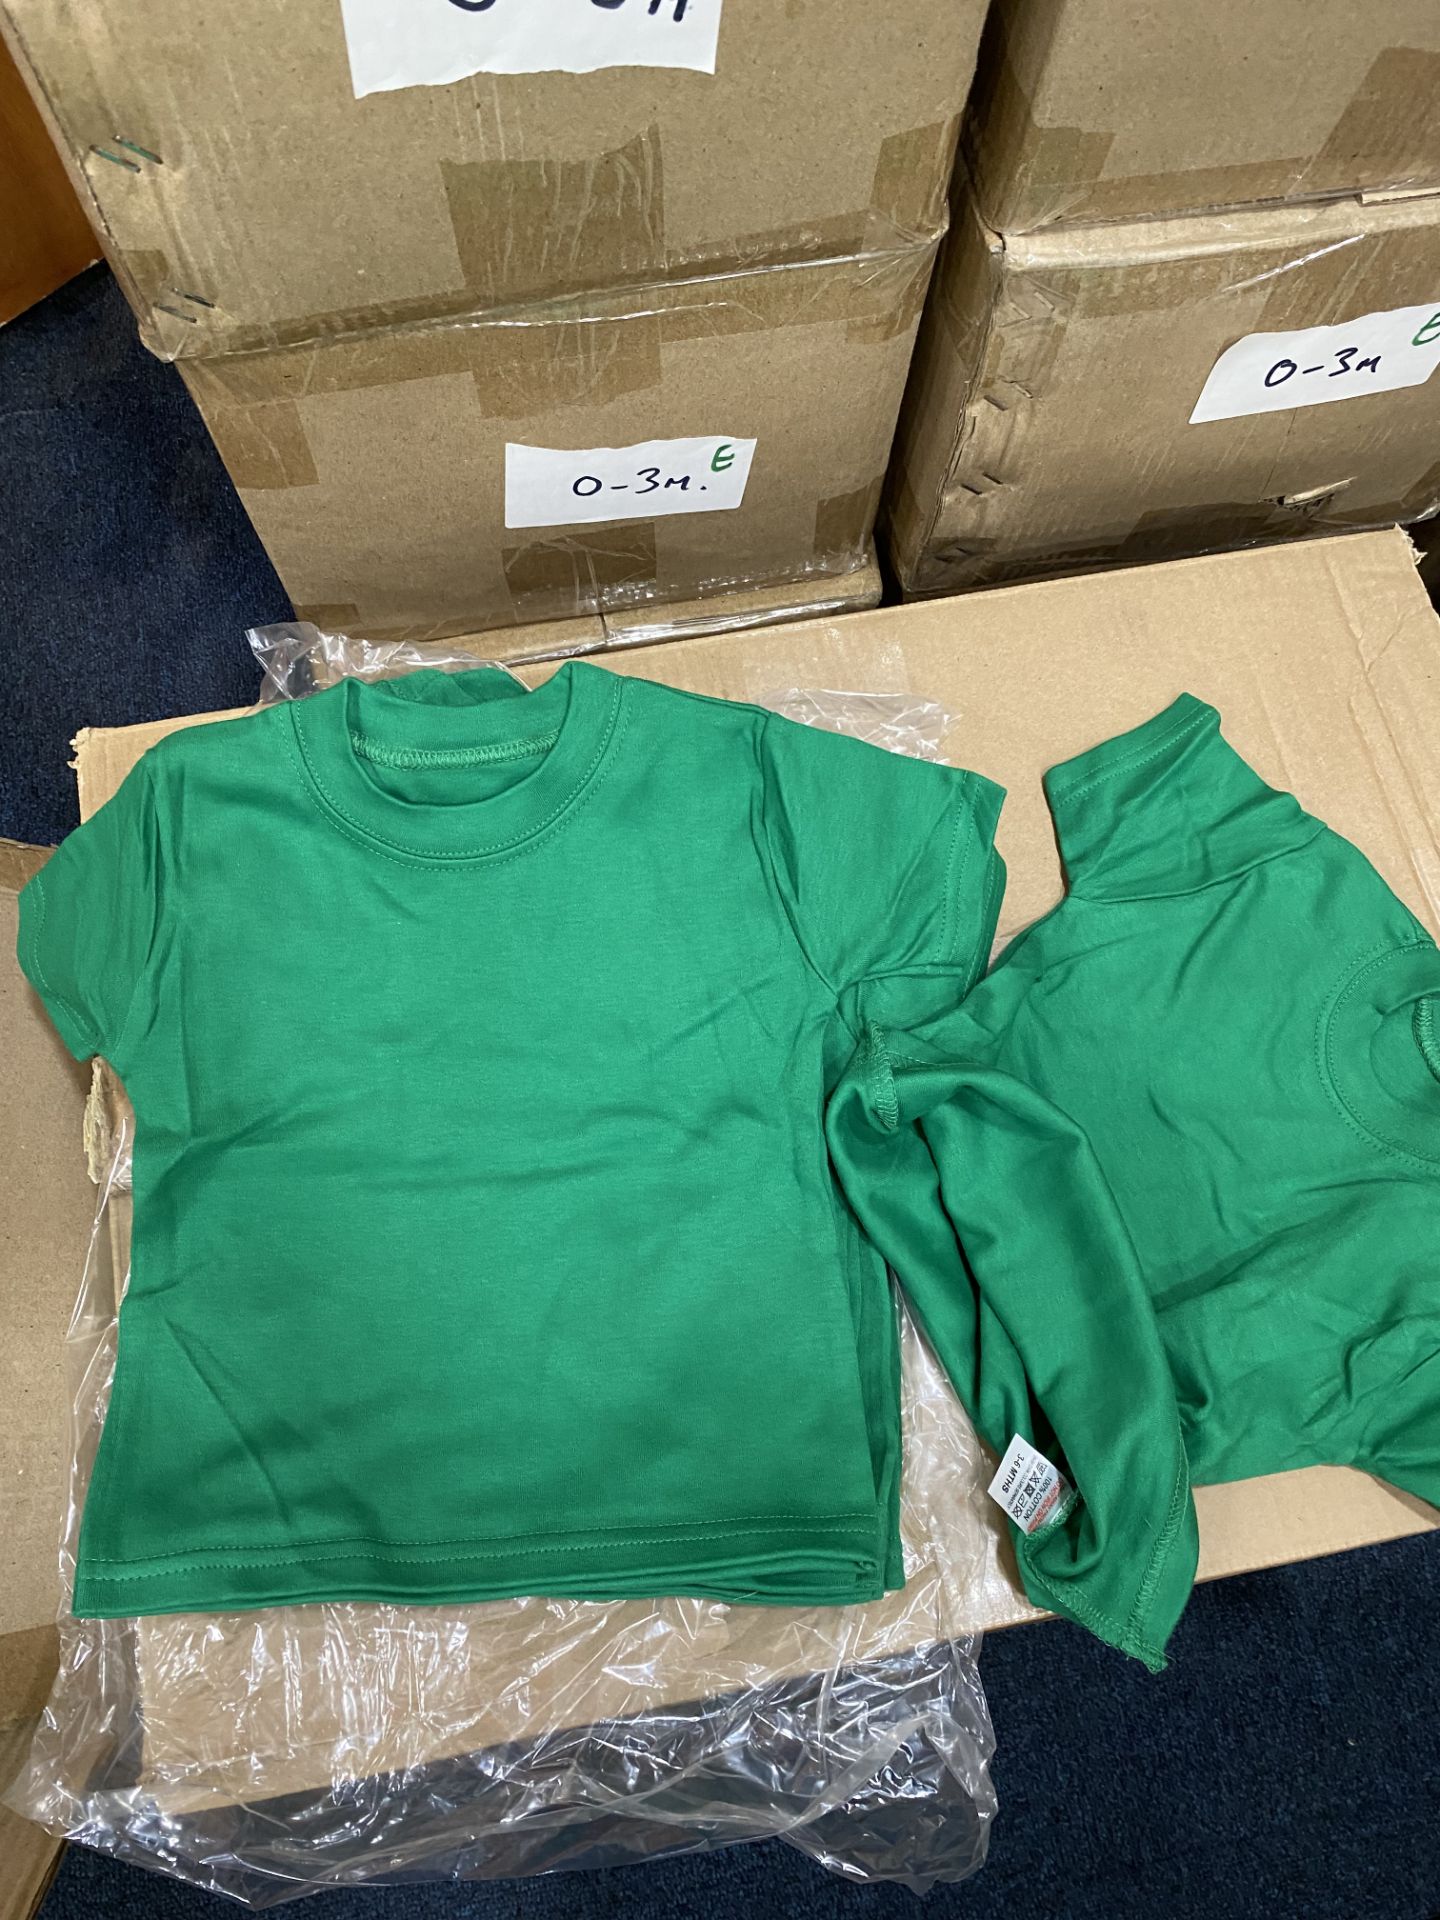 X50 GREEN BABY TSHIRTS - 2-3 YEARS - 100% COTTON - RRP £200